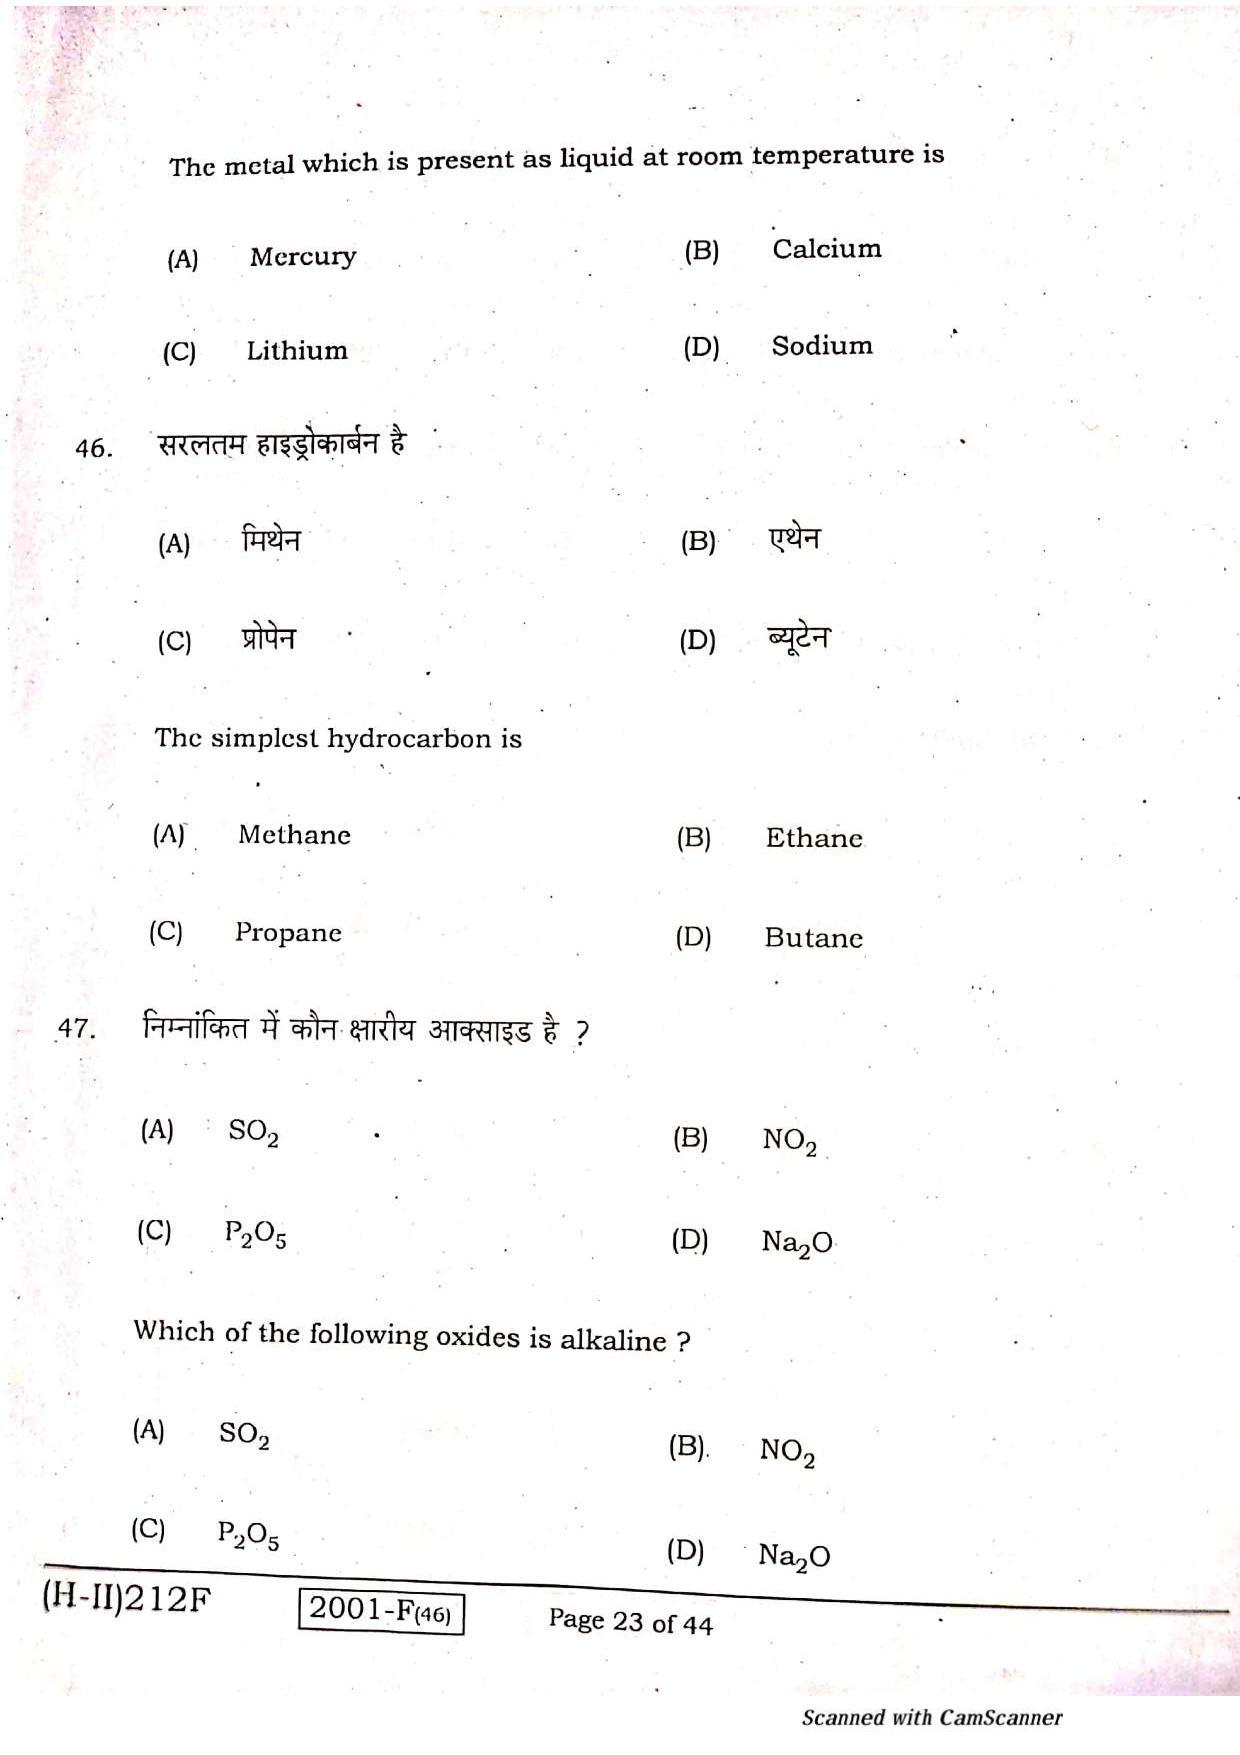 Bihar Board Class 10 Science 2021 (2nd Sitting) Question Paper - Page 21